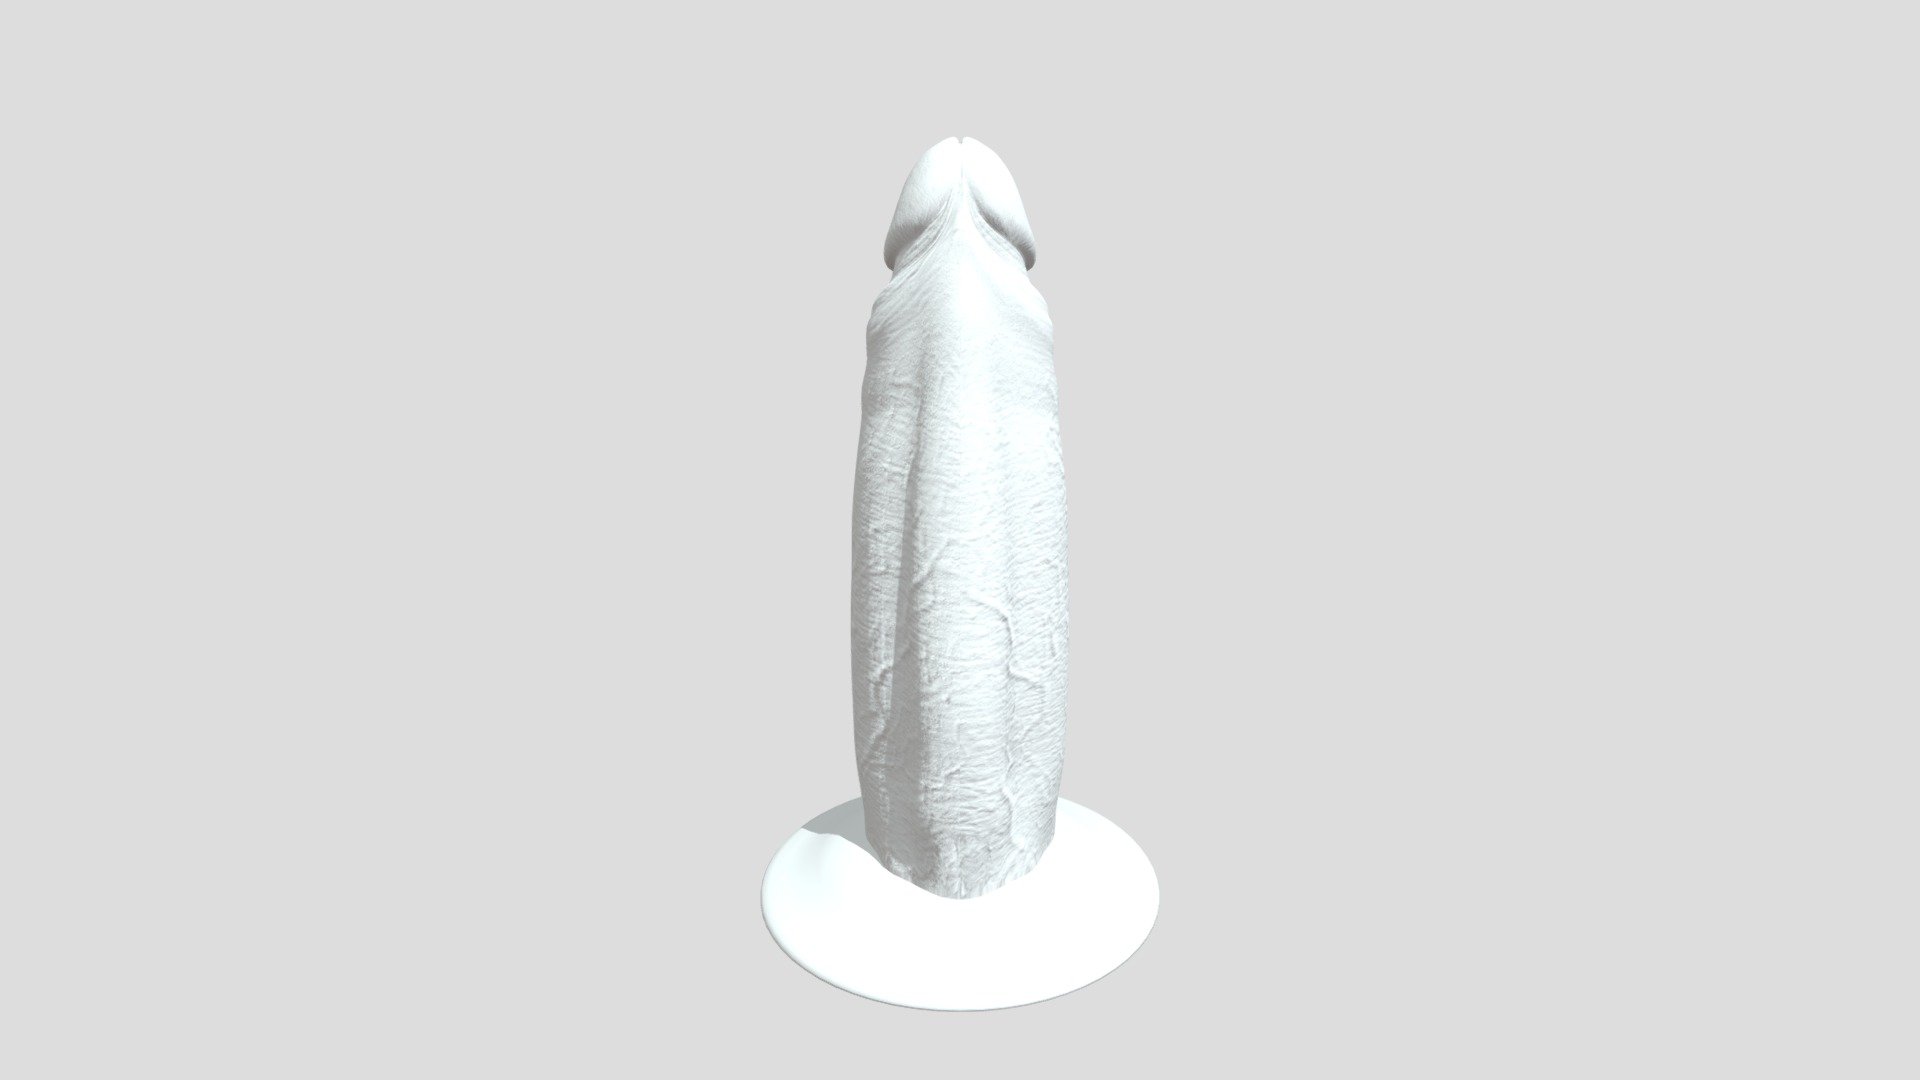 Realistic Huge Dildo Rigged 3D Model
Huge Realistic Dildo Rigged for your amazing works! Procedual materials were used for the renders of this models, no texture needed.

Exported into the next format files already included in the .zip:
.blend (native)
.abc
.dae
.fbx
.ply
.stl
.usdc
.obj .mtl
.x3d

The materials are procedually generated, but i don't know why sketchfab doesn't show them on the preview tab, but be most sure that they come with at least a simple material to the object.

Kind Regards TriDsign - Realistic Dildo - 3D model by TriDsign (@revash05) 3d model